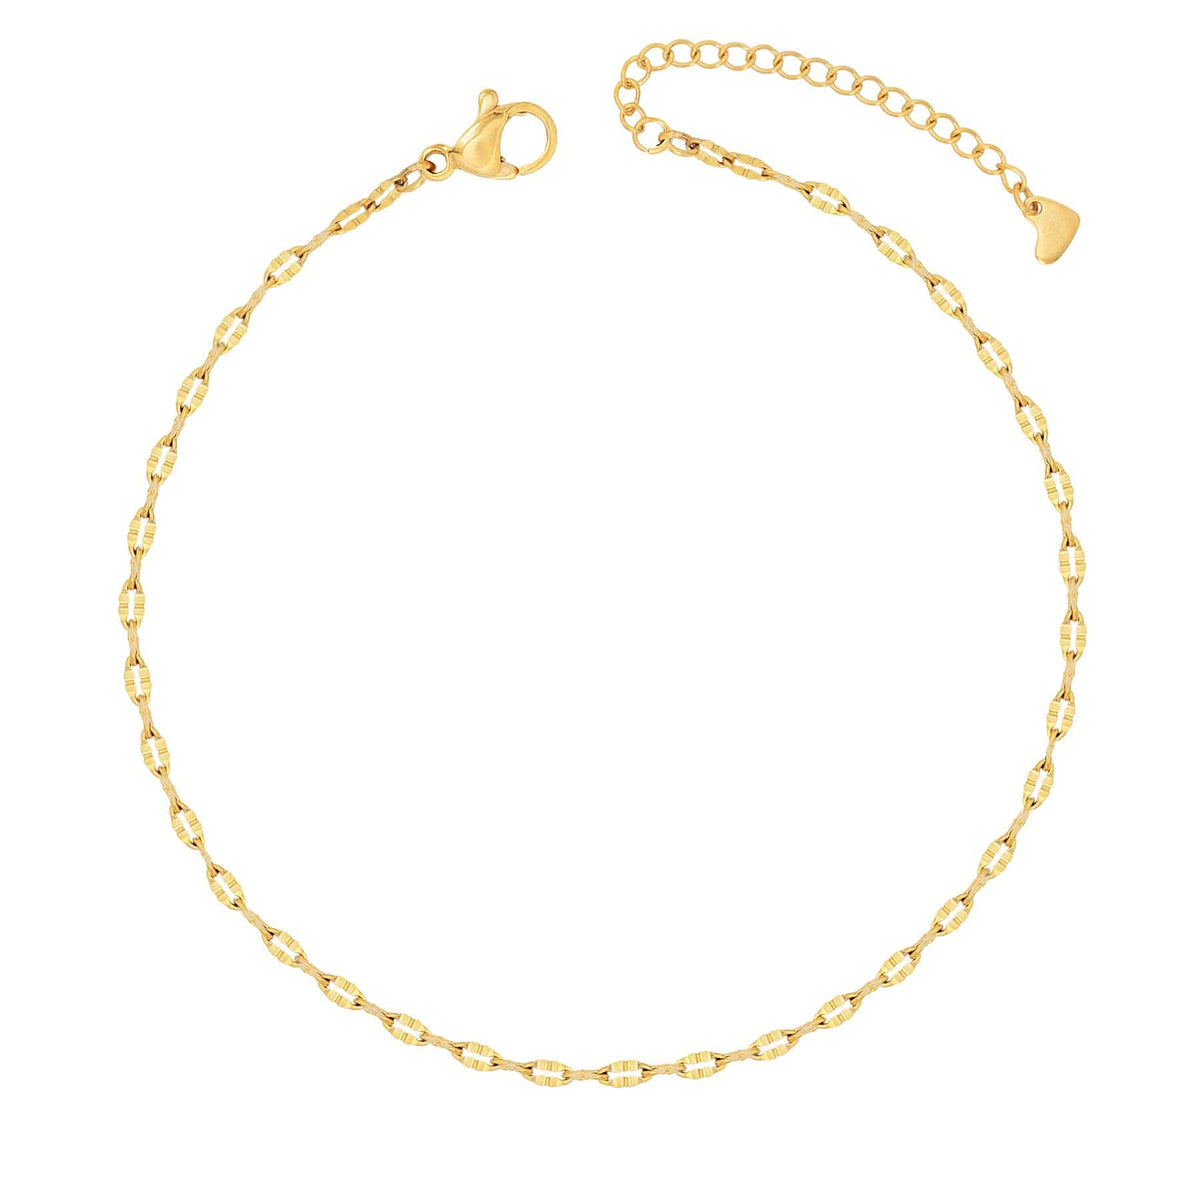 BohoMoon Stainless Steel Lois Anklet Gold